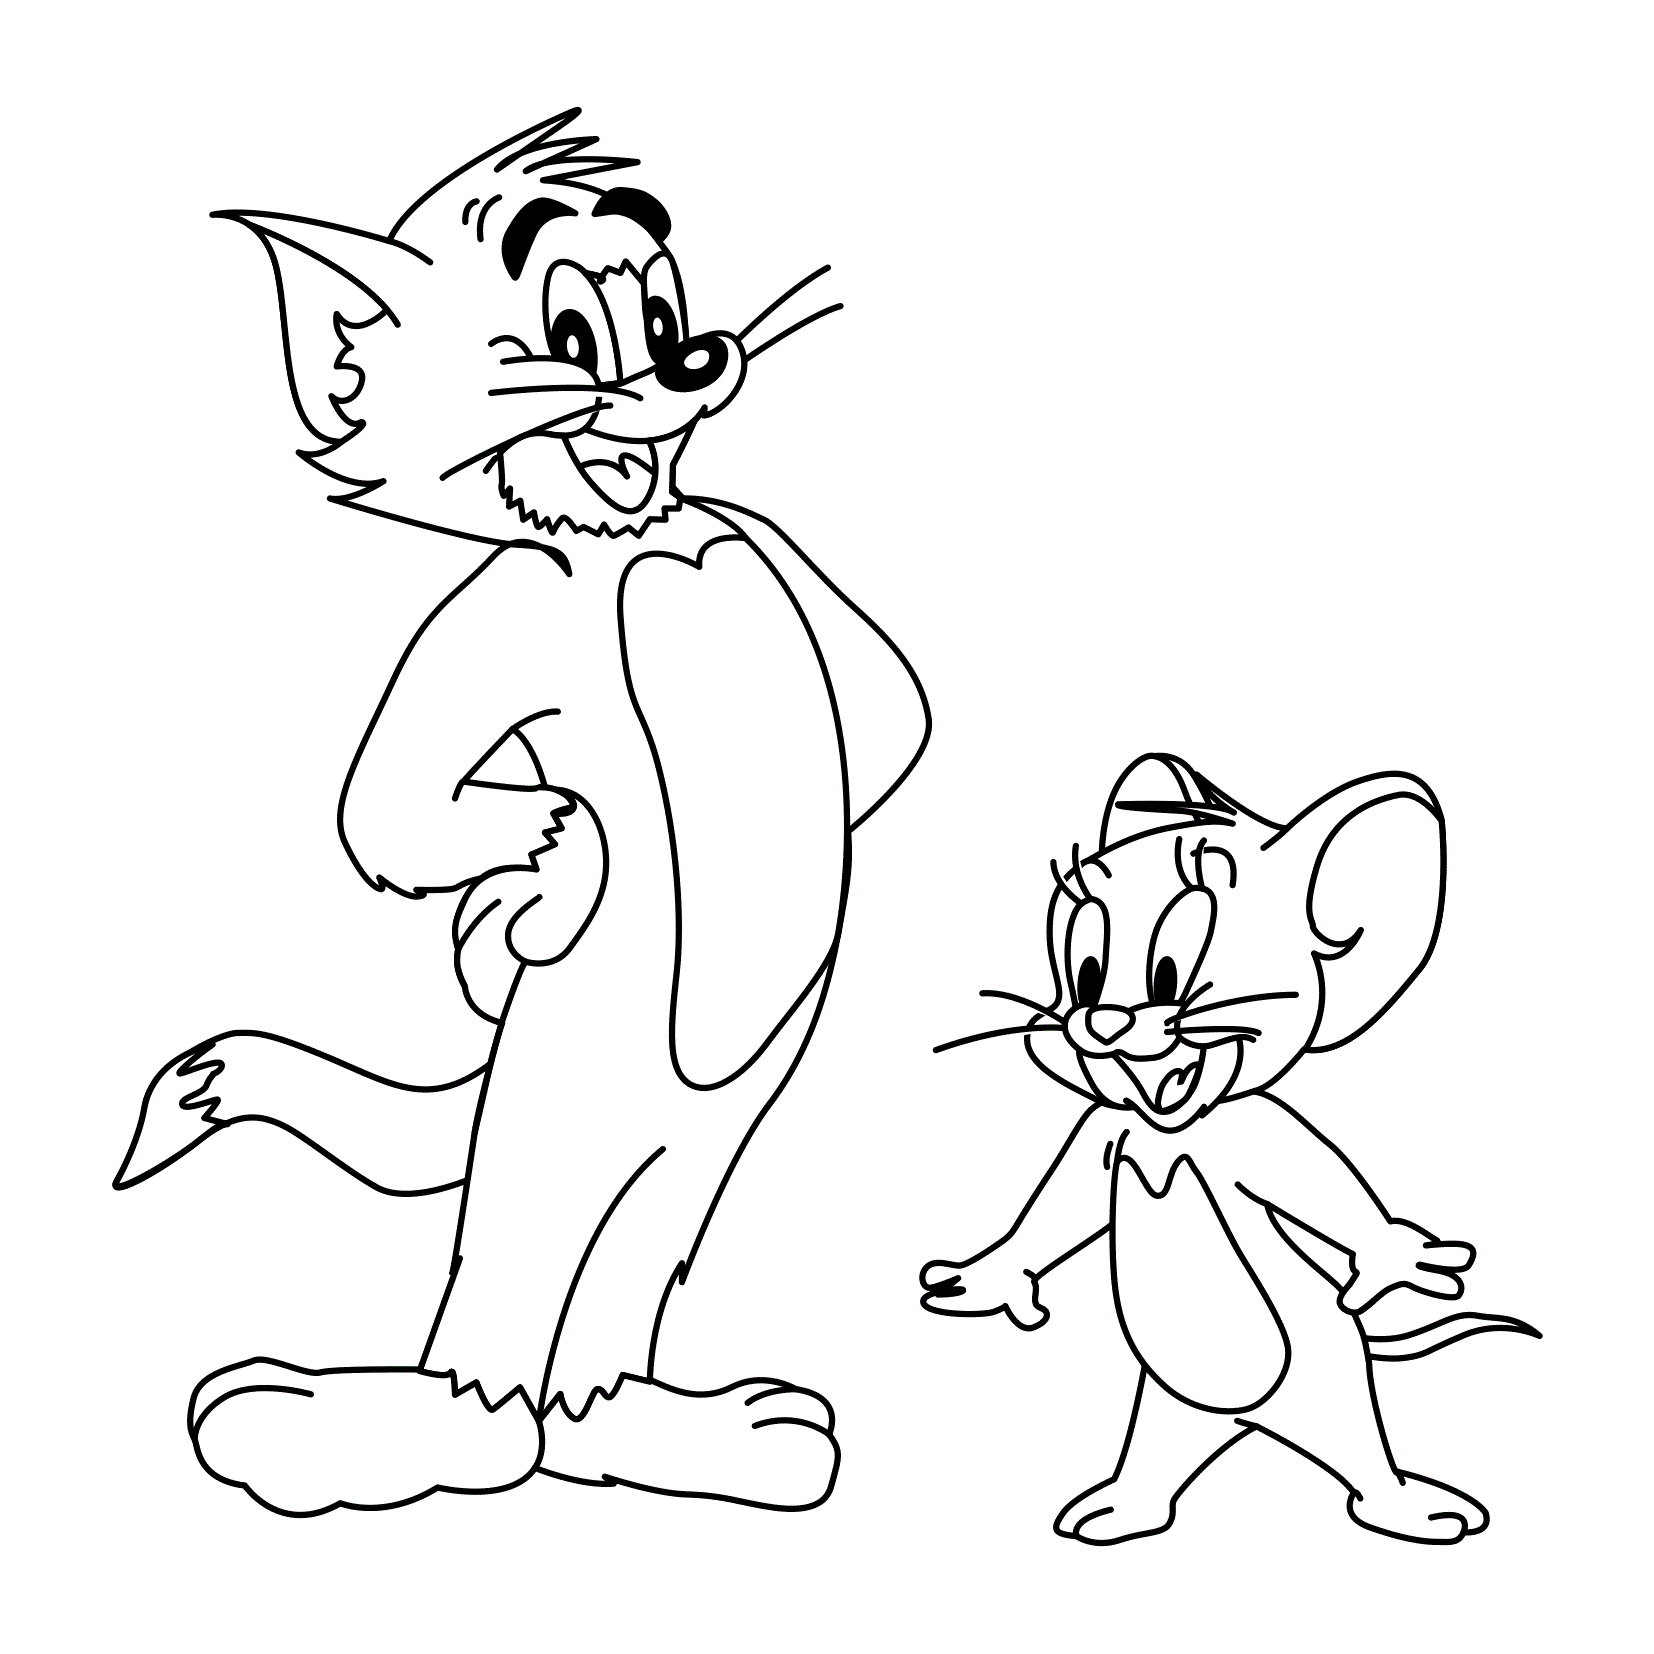 tom and jerry coloring page free printable tom and jerry coloring pages for kids coloring jerry tom and page 